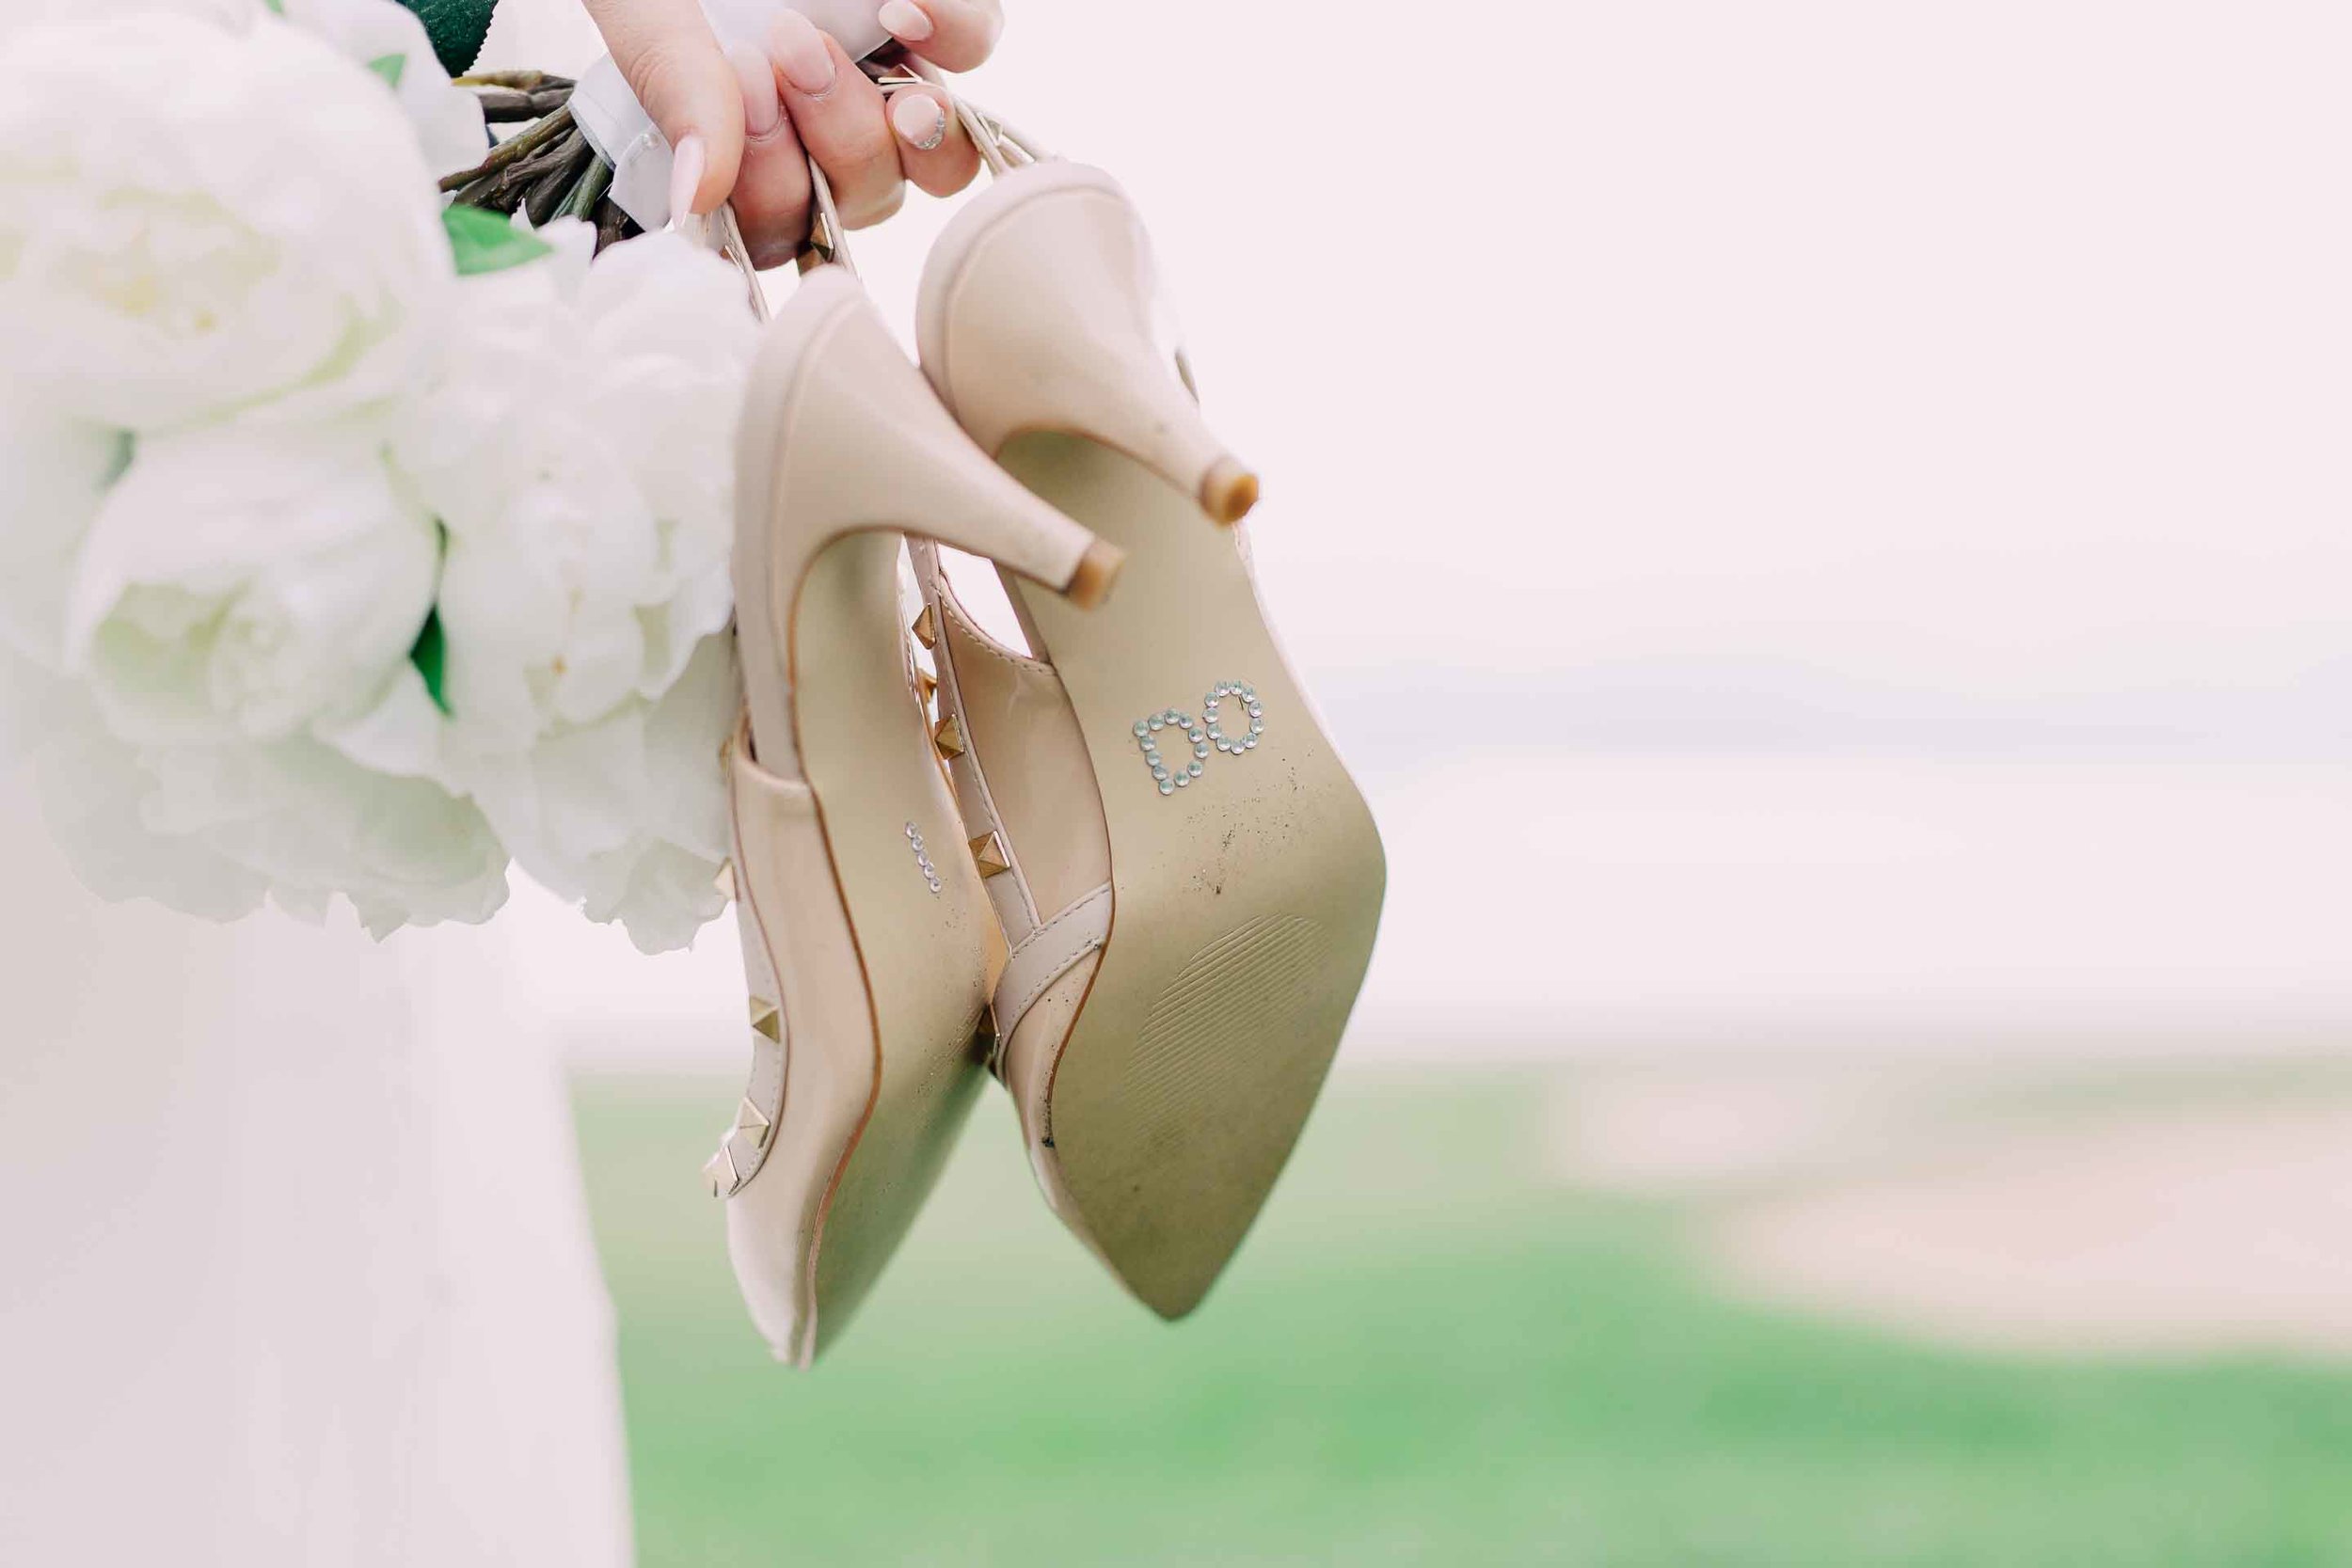 Artificial white peony wedding bouquet and bride's shoes with I Do on the soles in rhinestones. Wedding shoes are Nude Valentino studded heels.